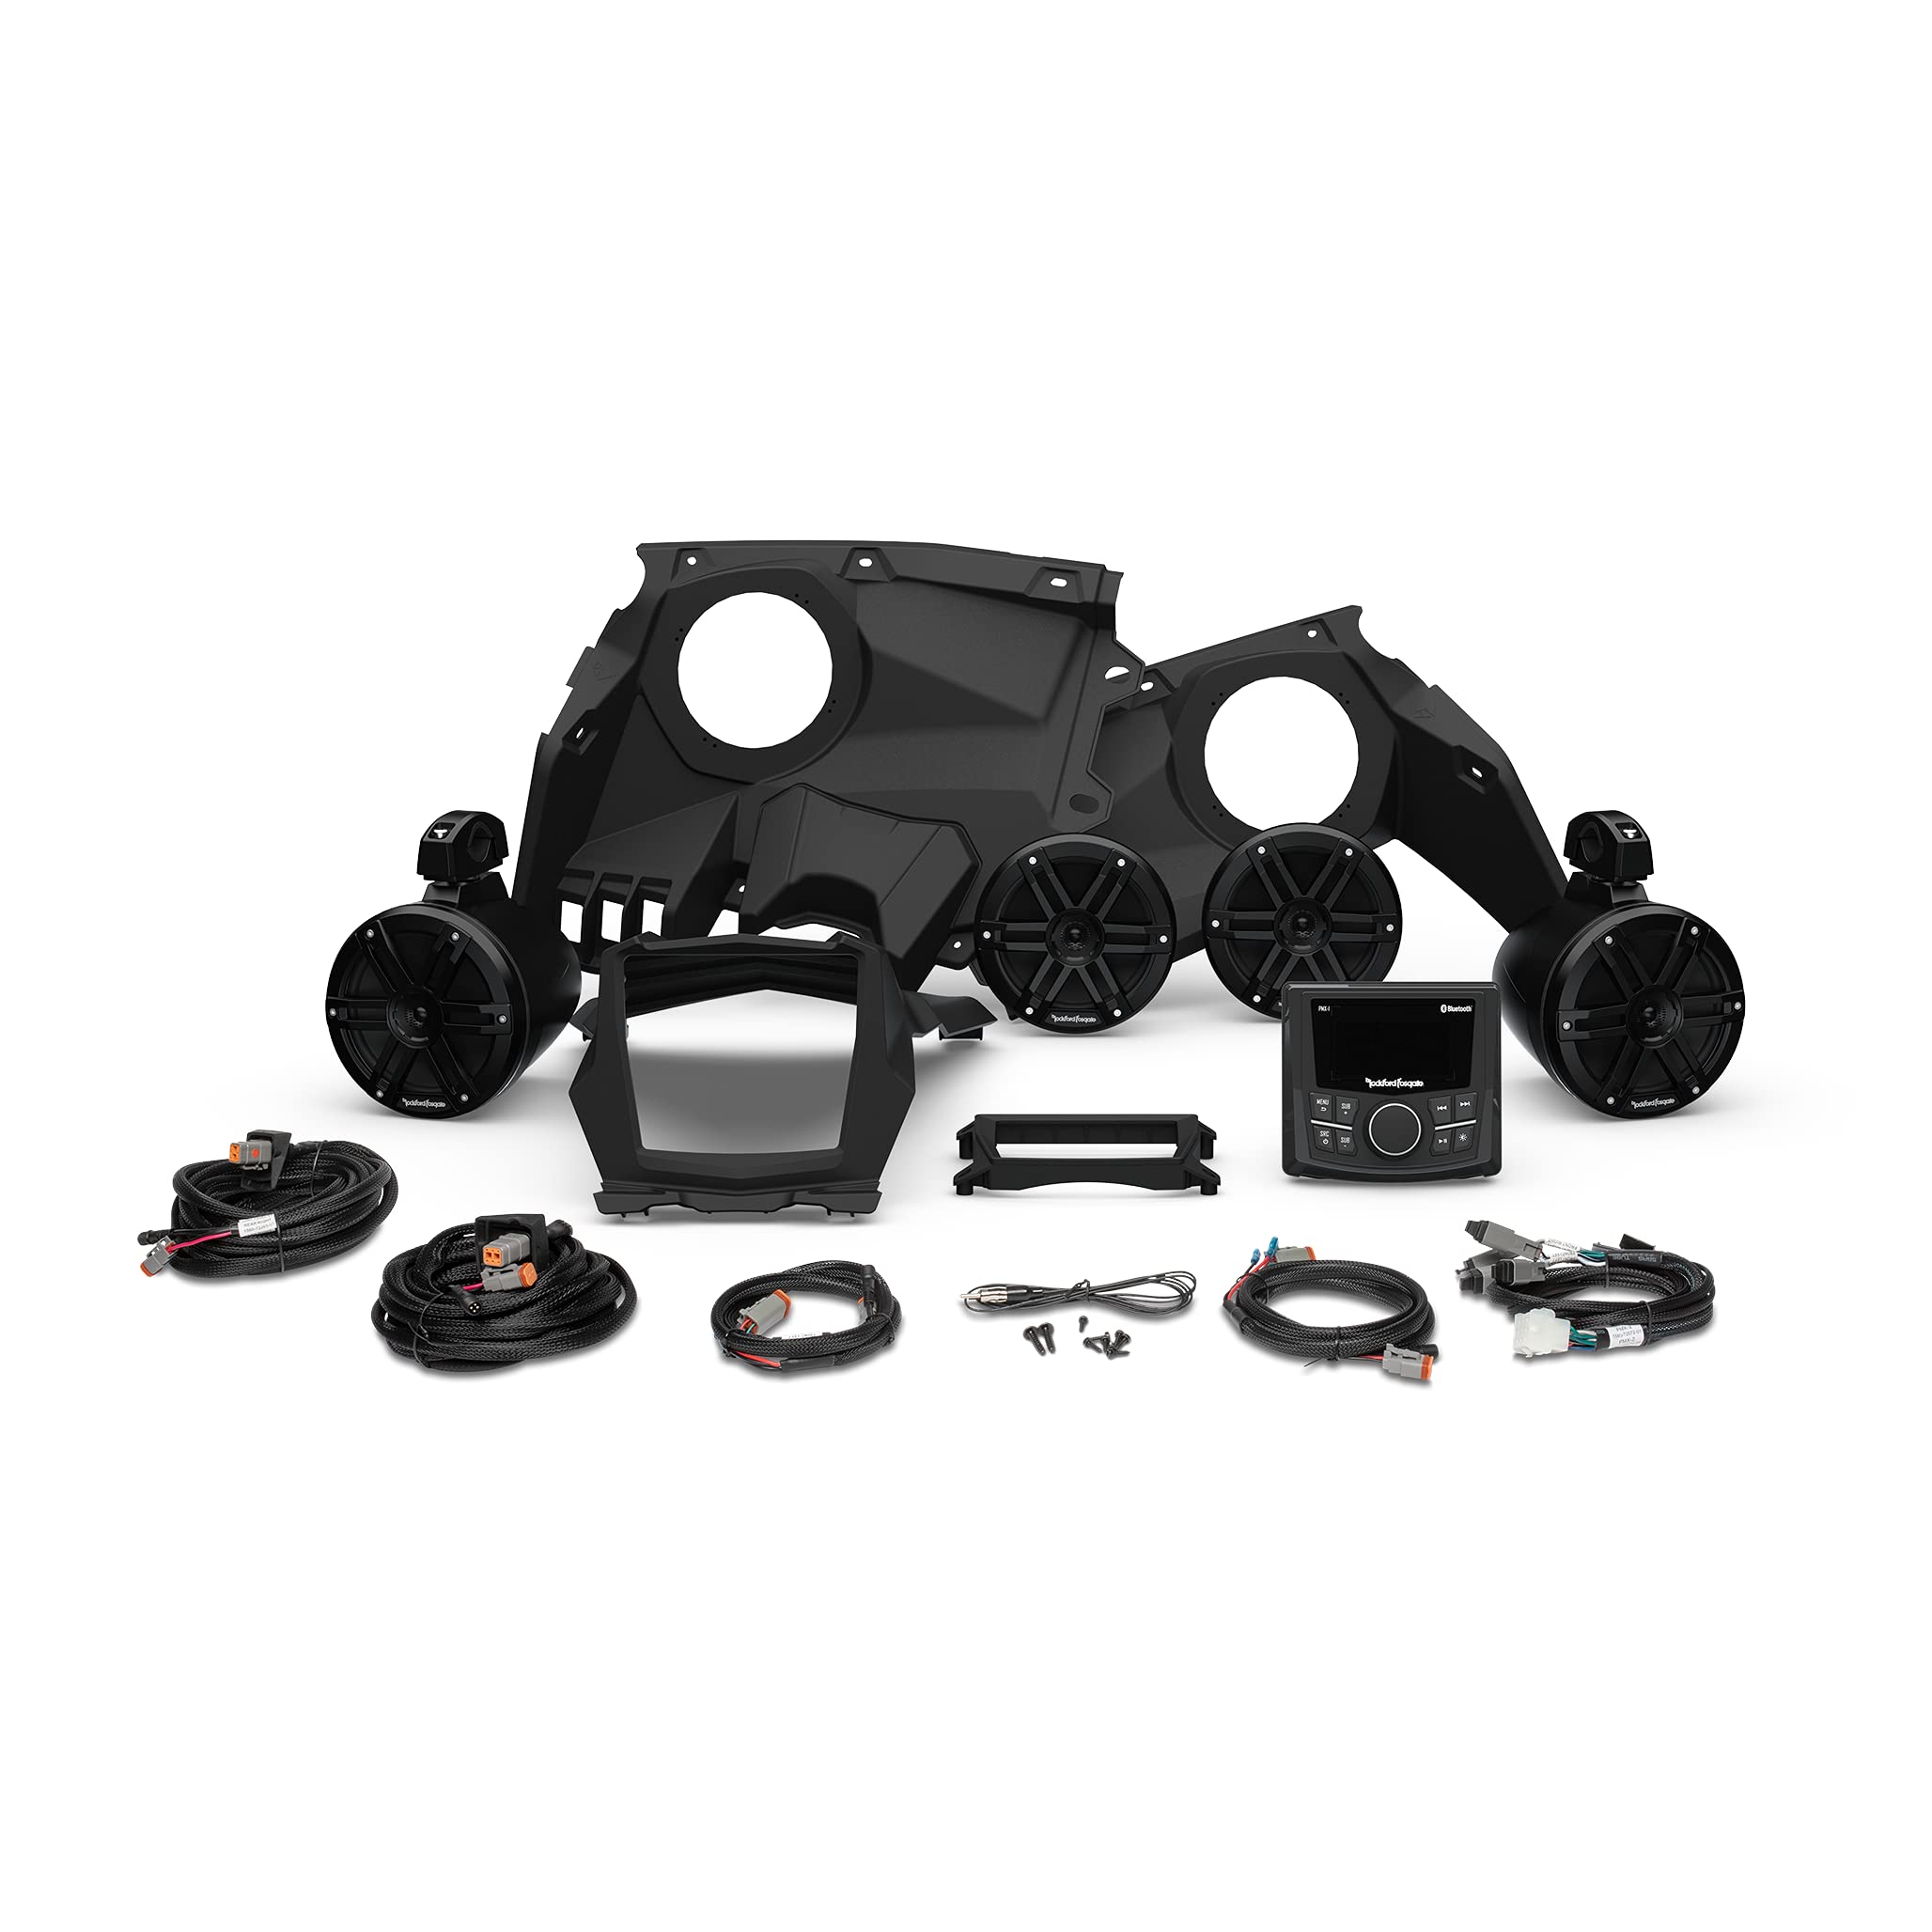 Rockford Fosgate X317-STG2 Audio Kit: PMX-1 Receiver & M0 Series Front & Rear Speakers Kit for Select Can-Am Maverick X3 Models (2017-2022)